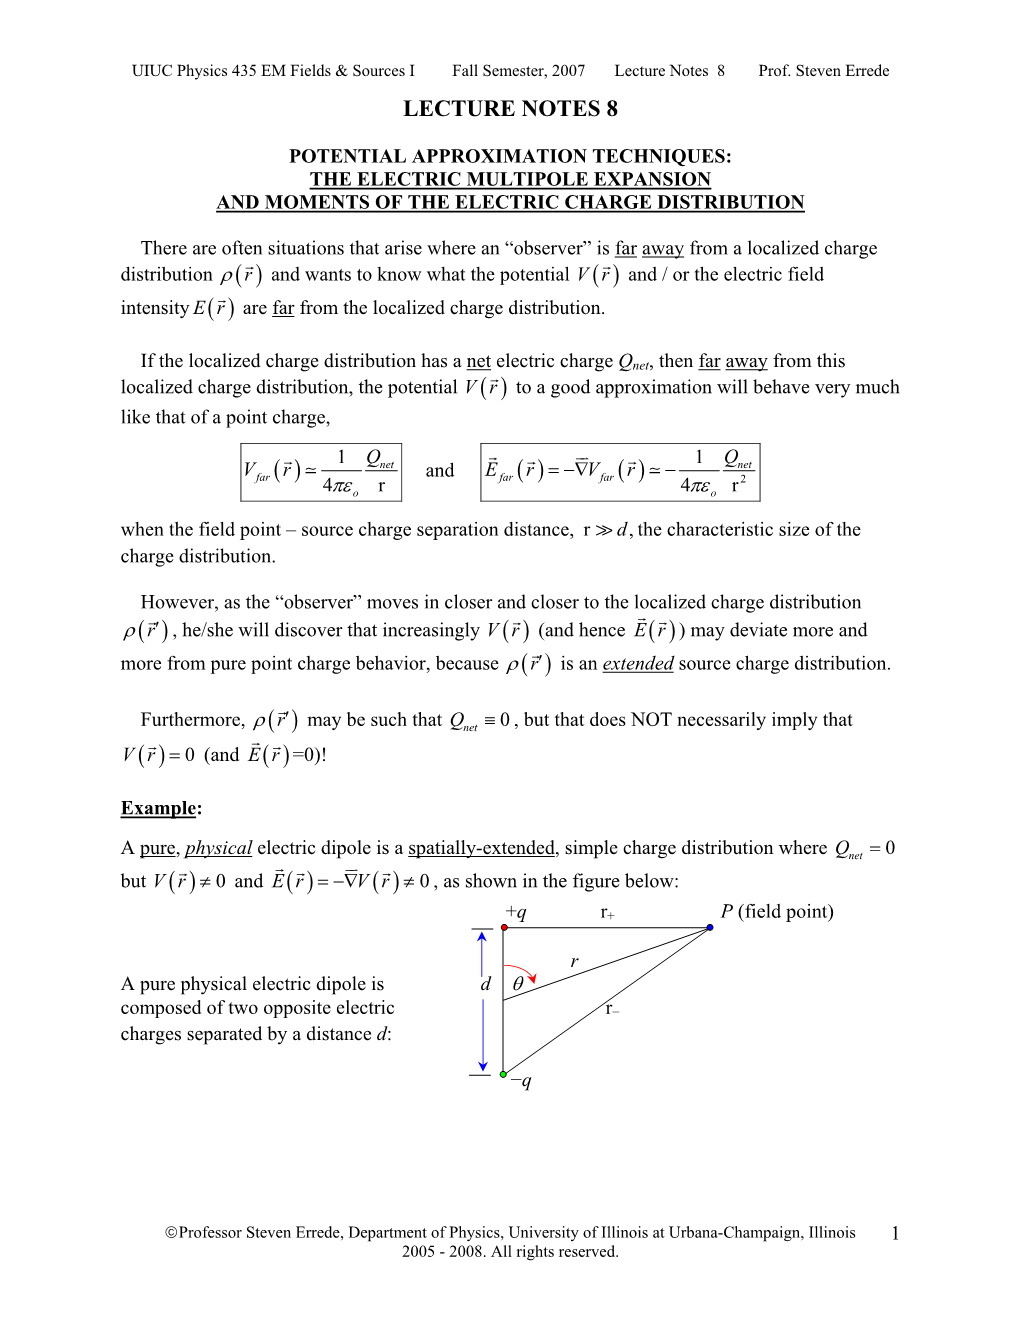 Lecture Notes 08: Electric Multipole Expansion